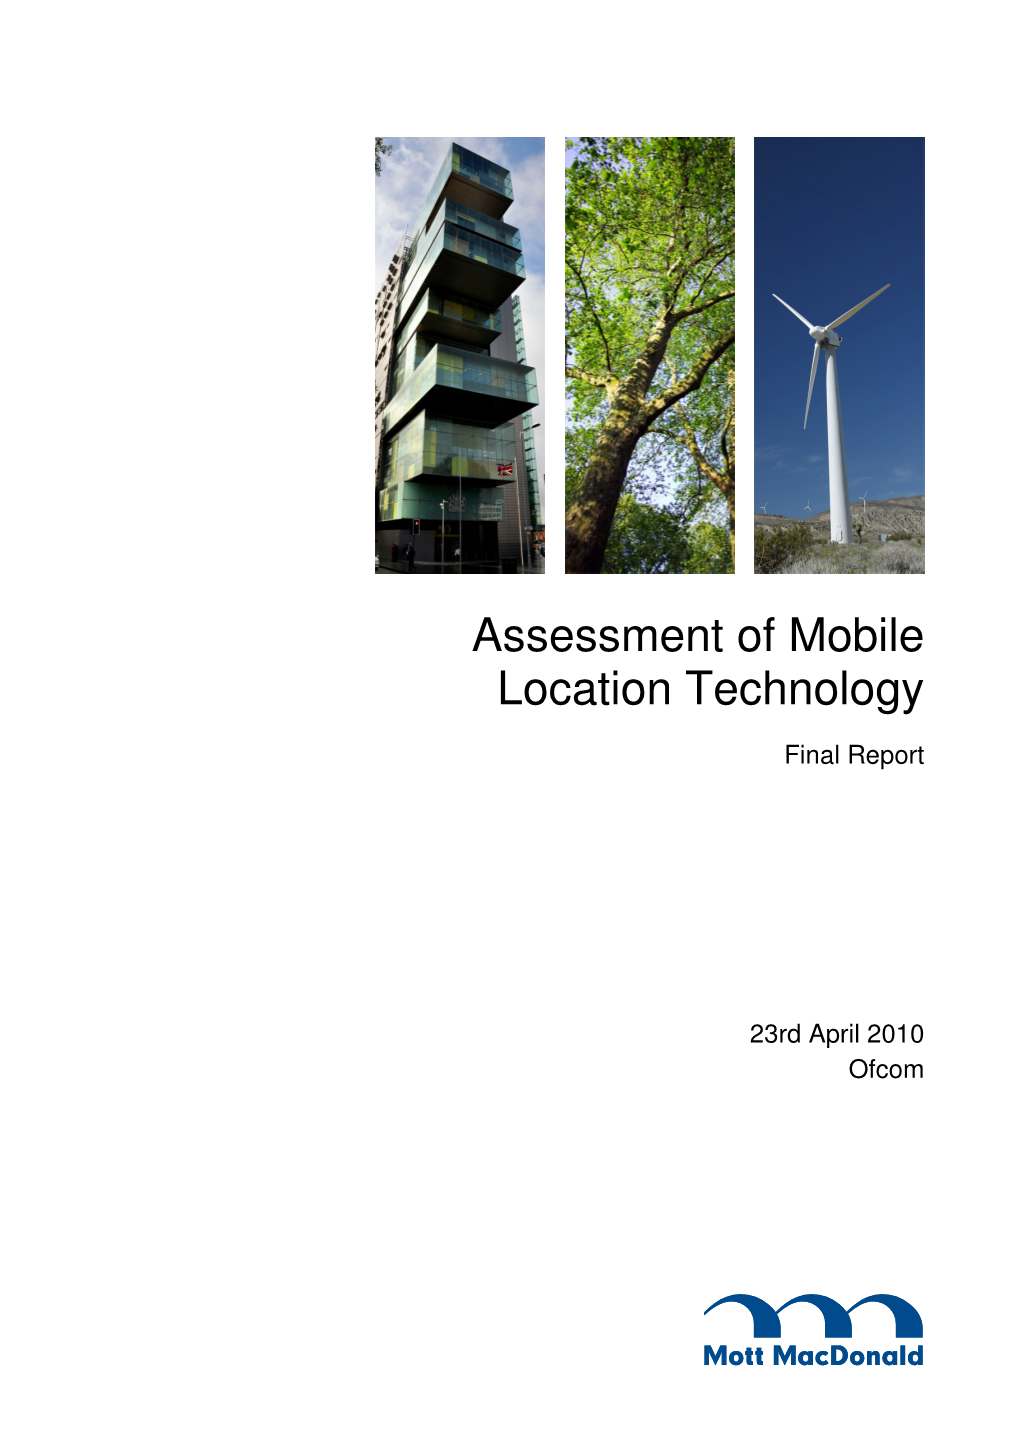 Assessment of Mobile Location Technology